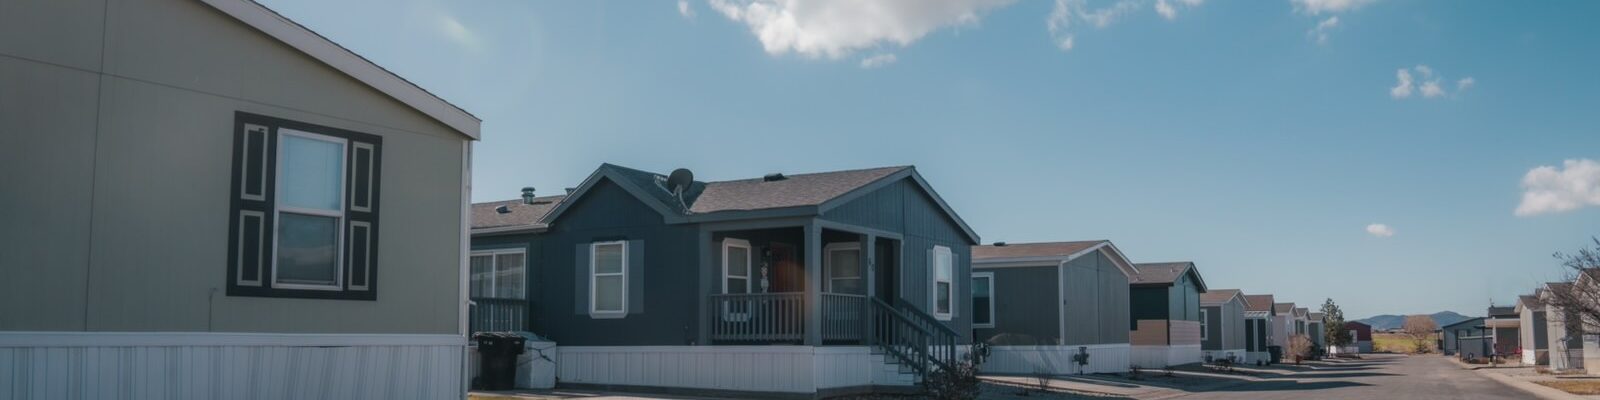 street view of manufactured home community